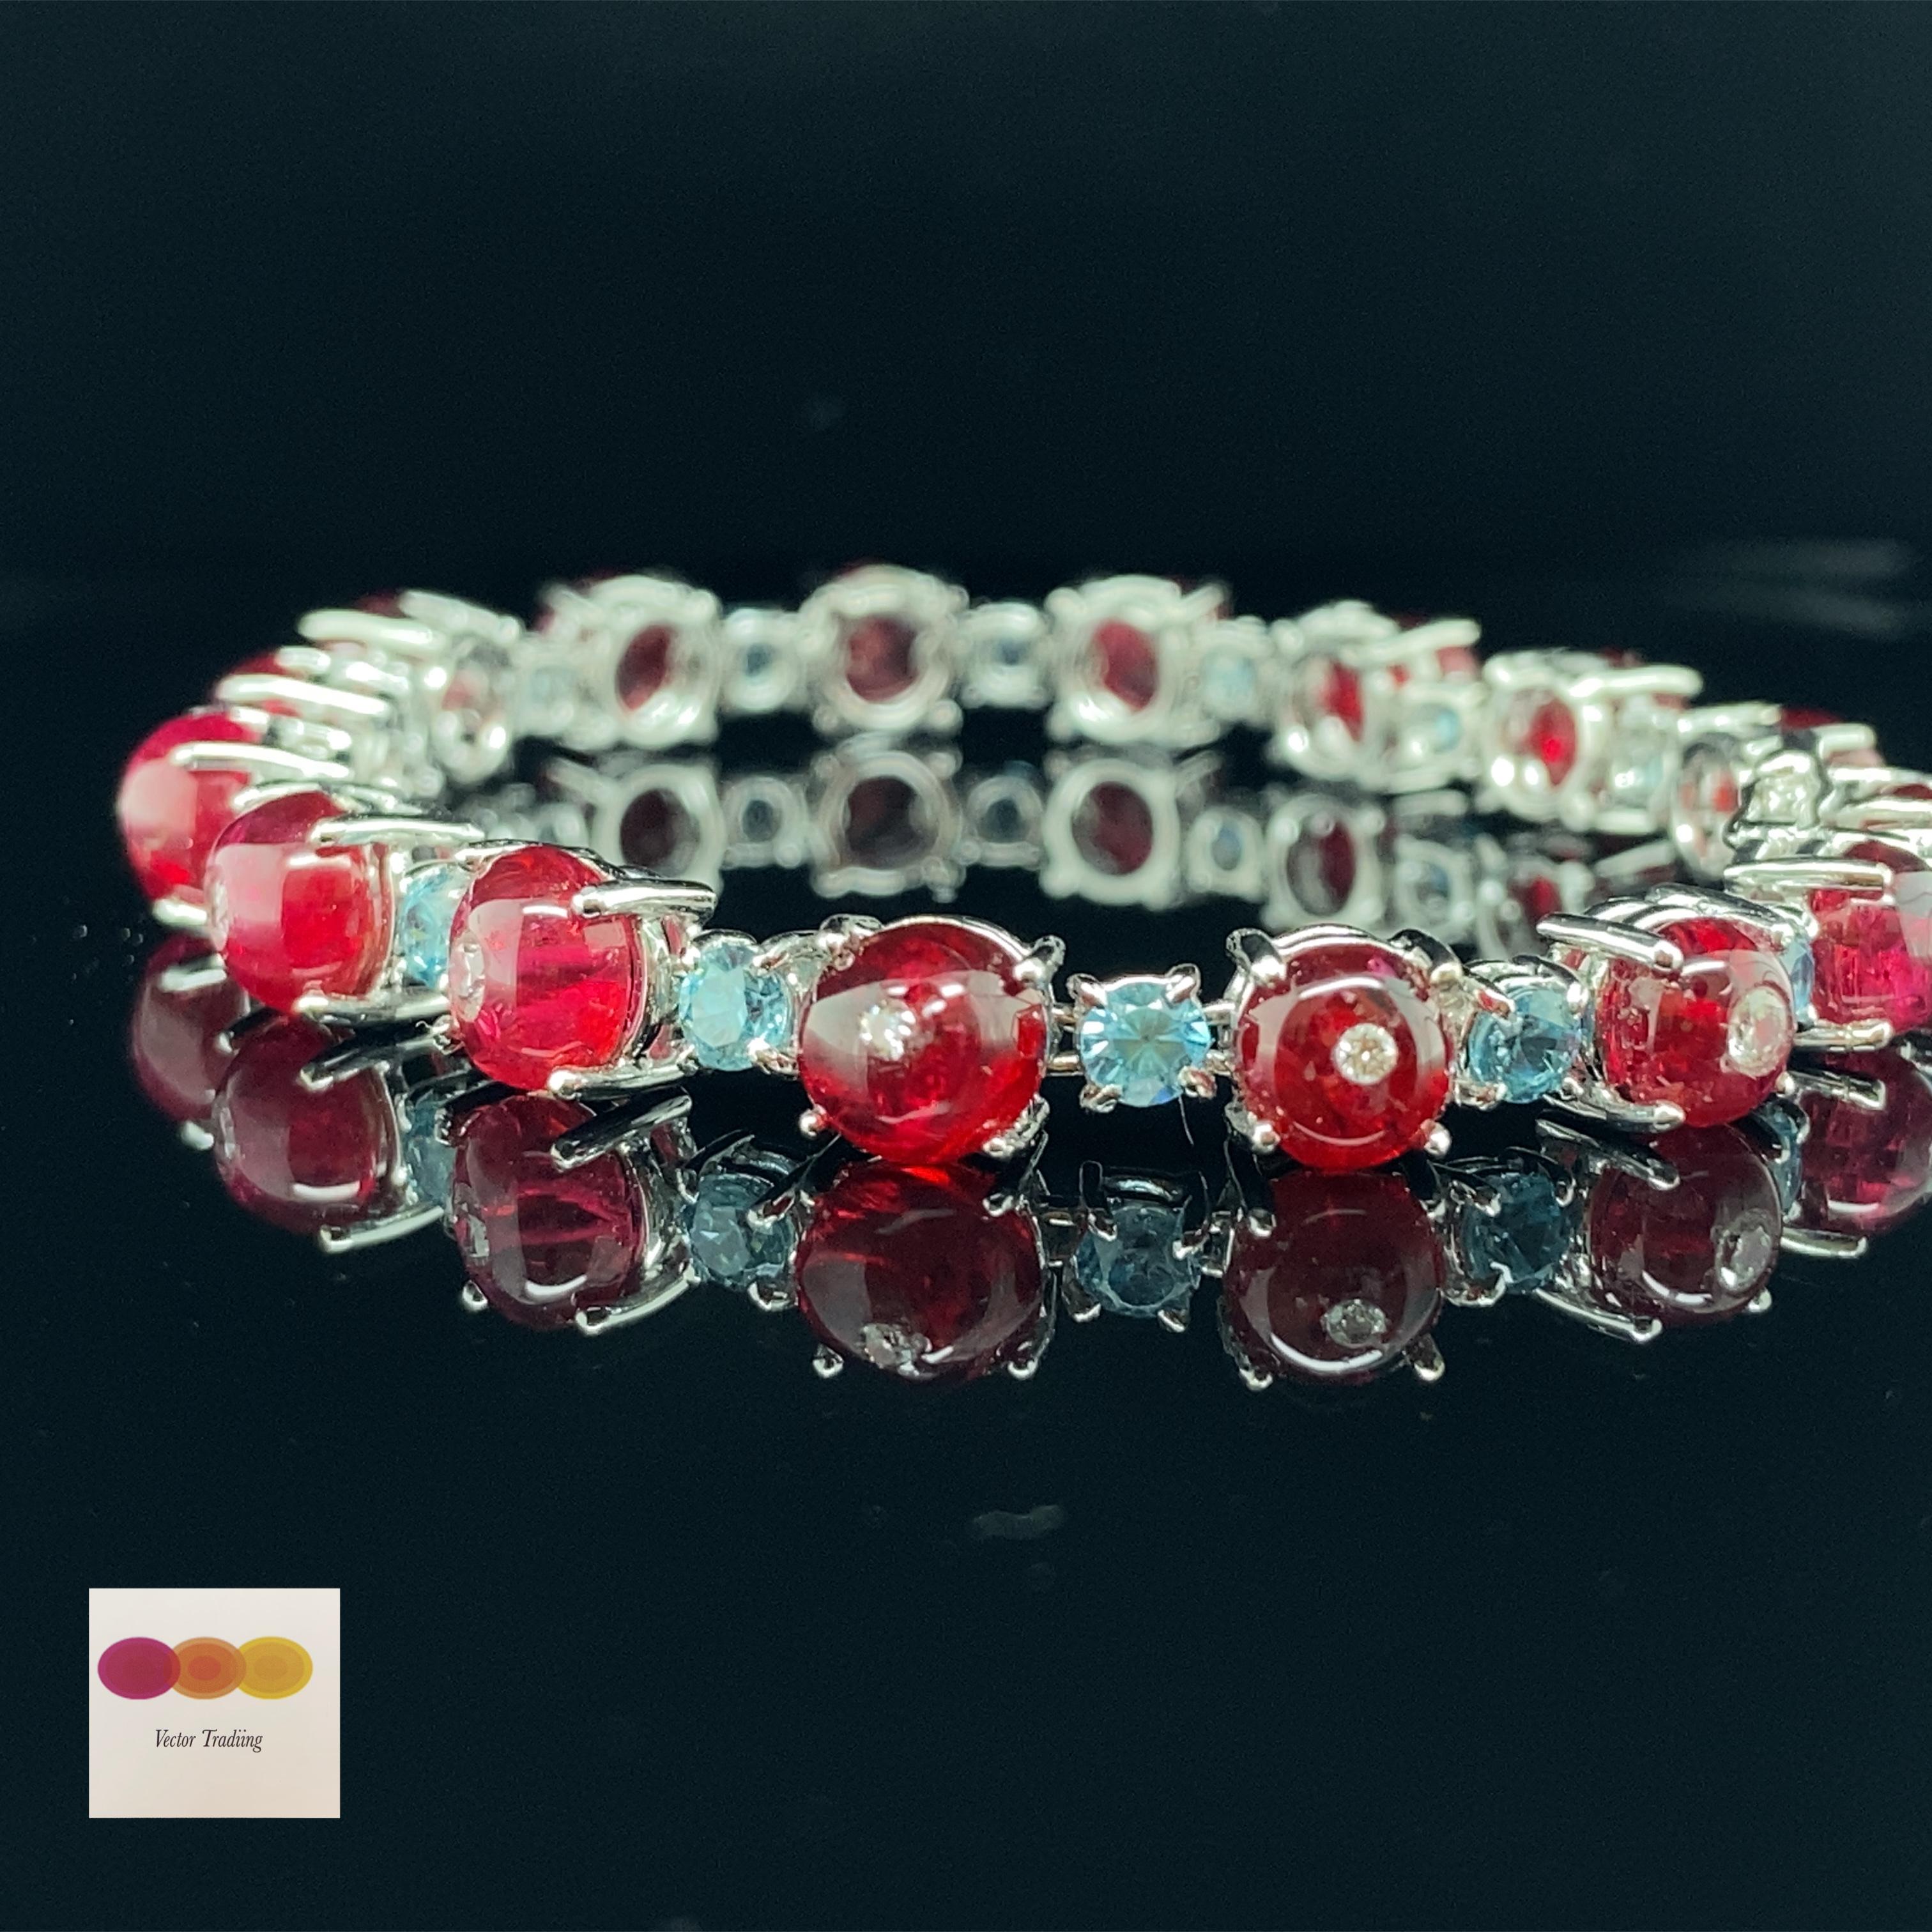 22.8 Carat Natural Burma No Heat Spinel Beads Blue Zircon White Diamond Bracelet:

A beautiful jewel, it features natural Burmese unheated red spinel beads weighing 22.8 carat inlayed with white diamonds weighing 0.96 carat and interspersed with